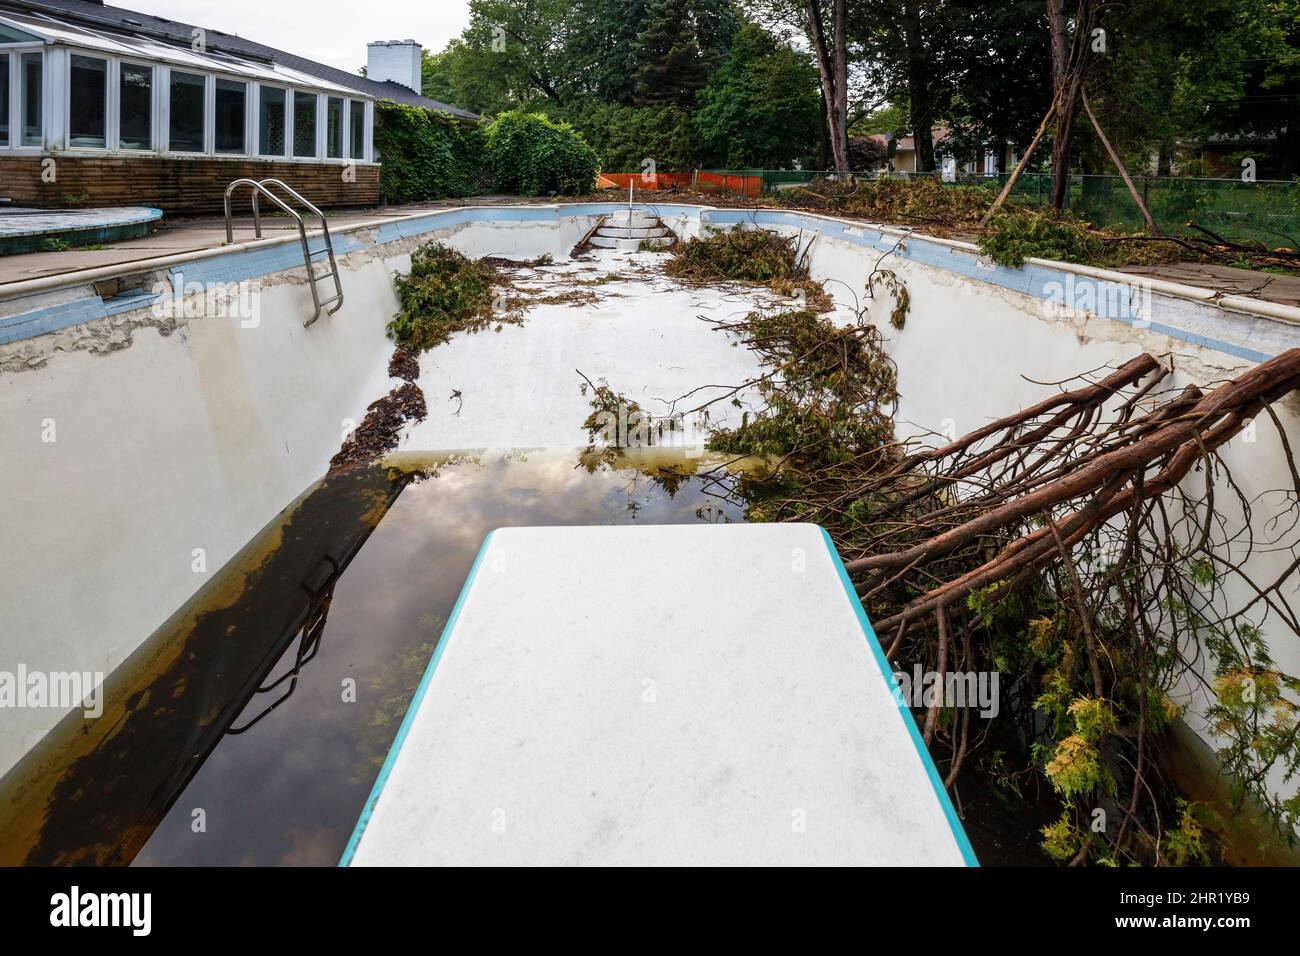 A dirty outdoor swimming pool with trees inside it.  This house has been demolished. Stock Photo